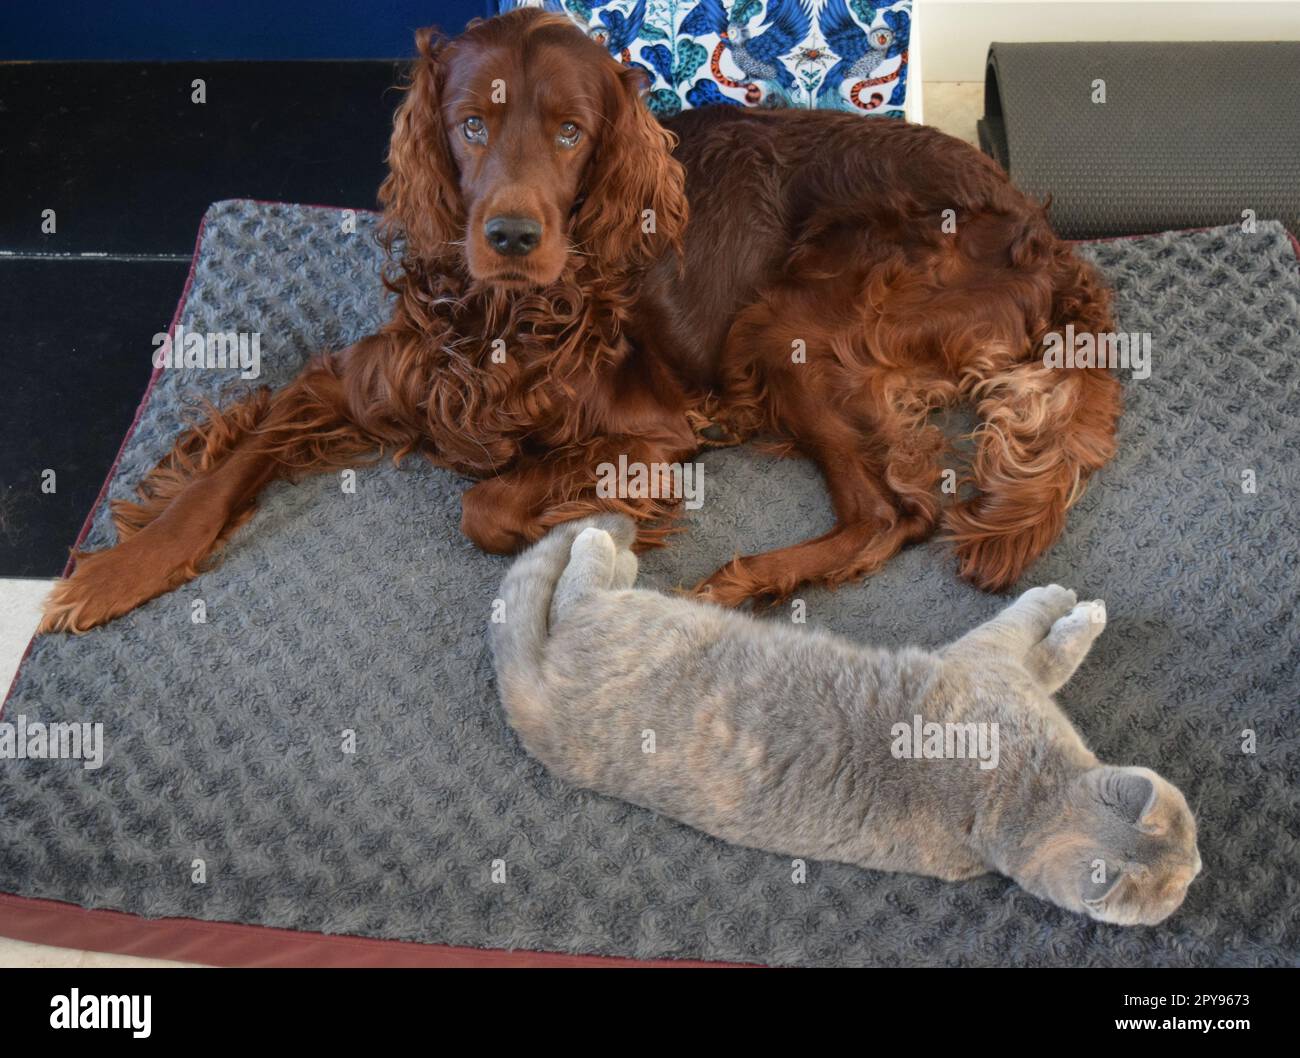 Dog and cat are happtogether at home. Stock Photo